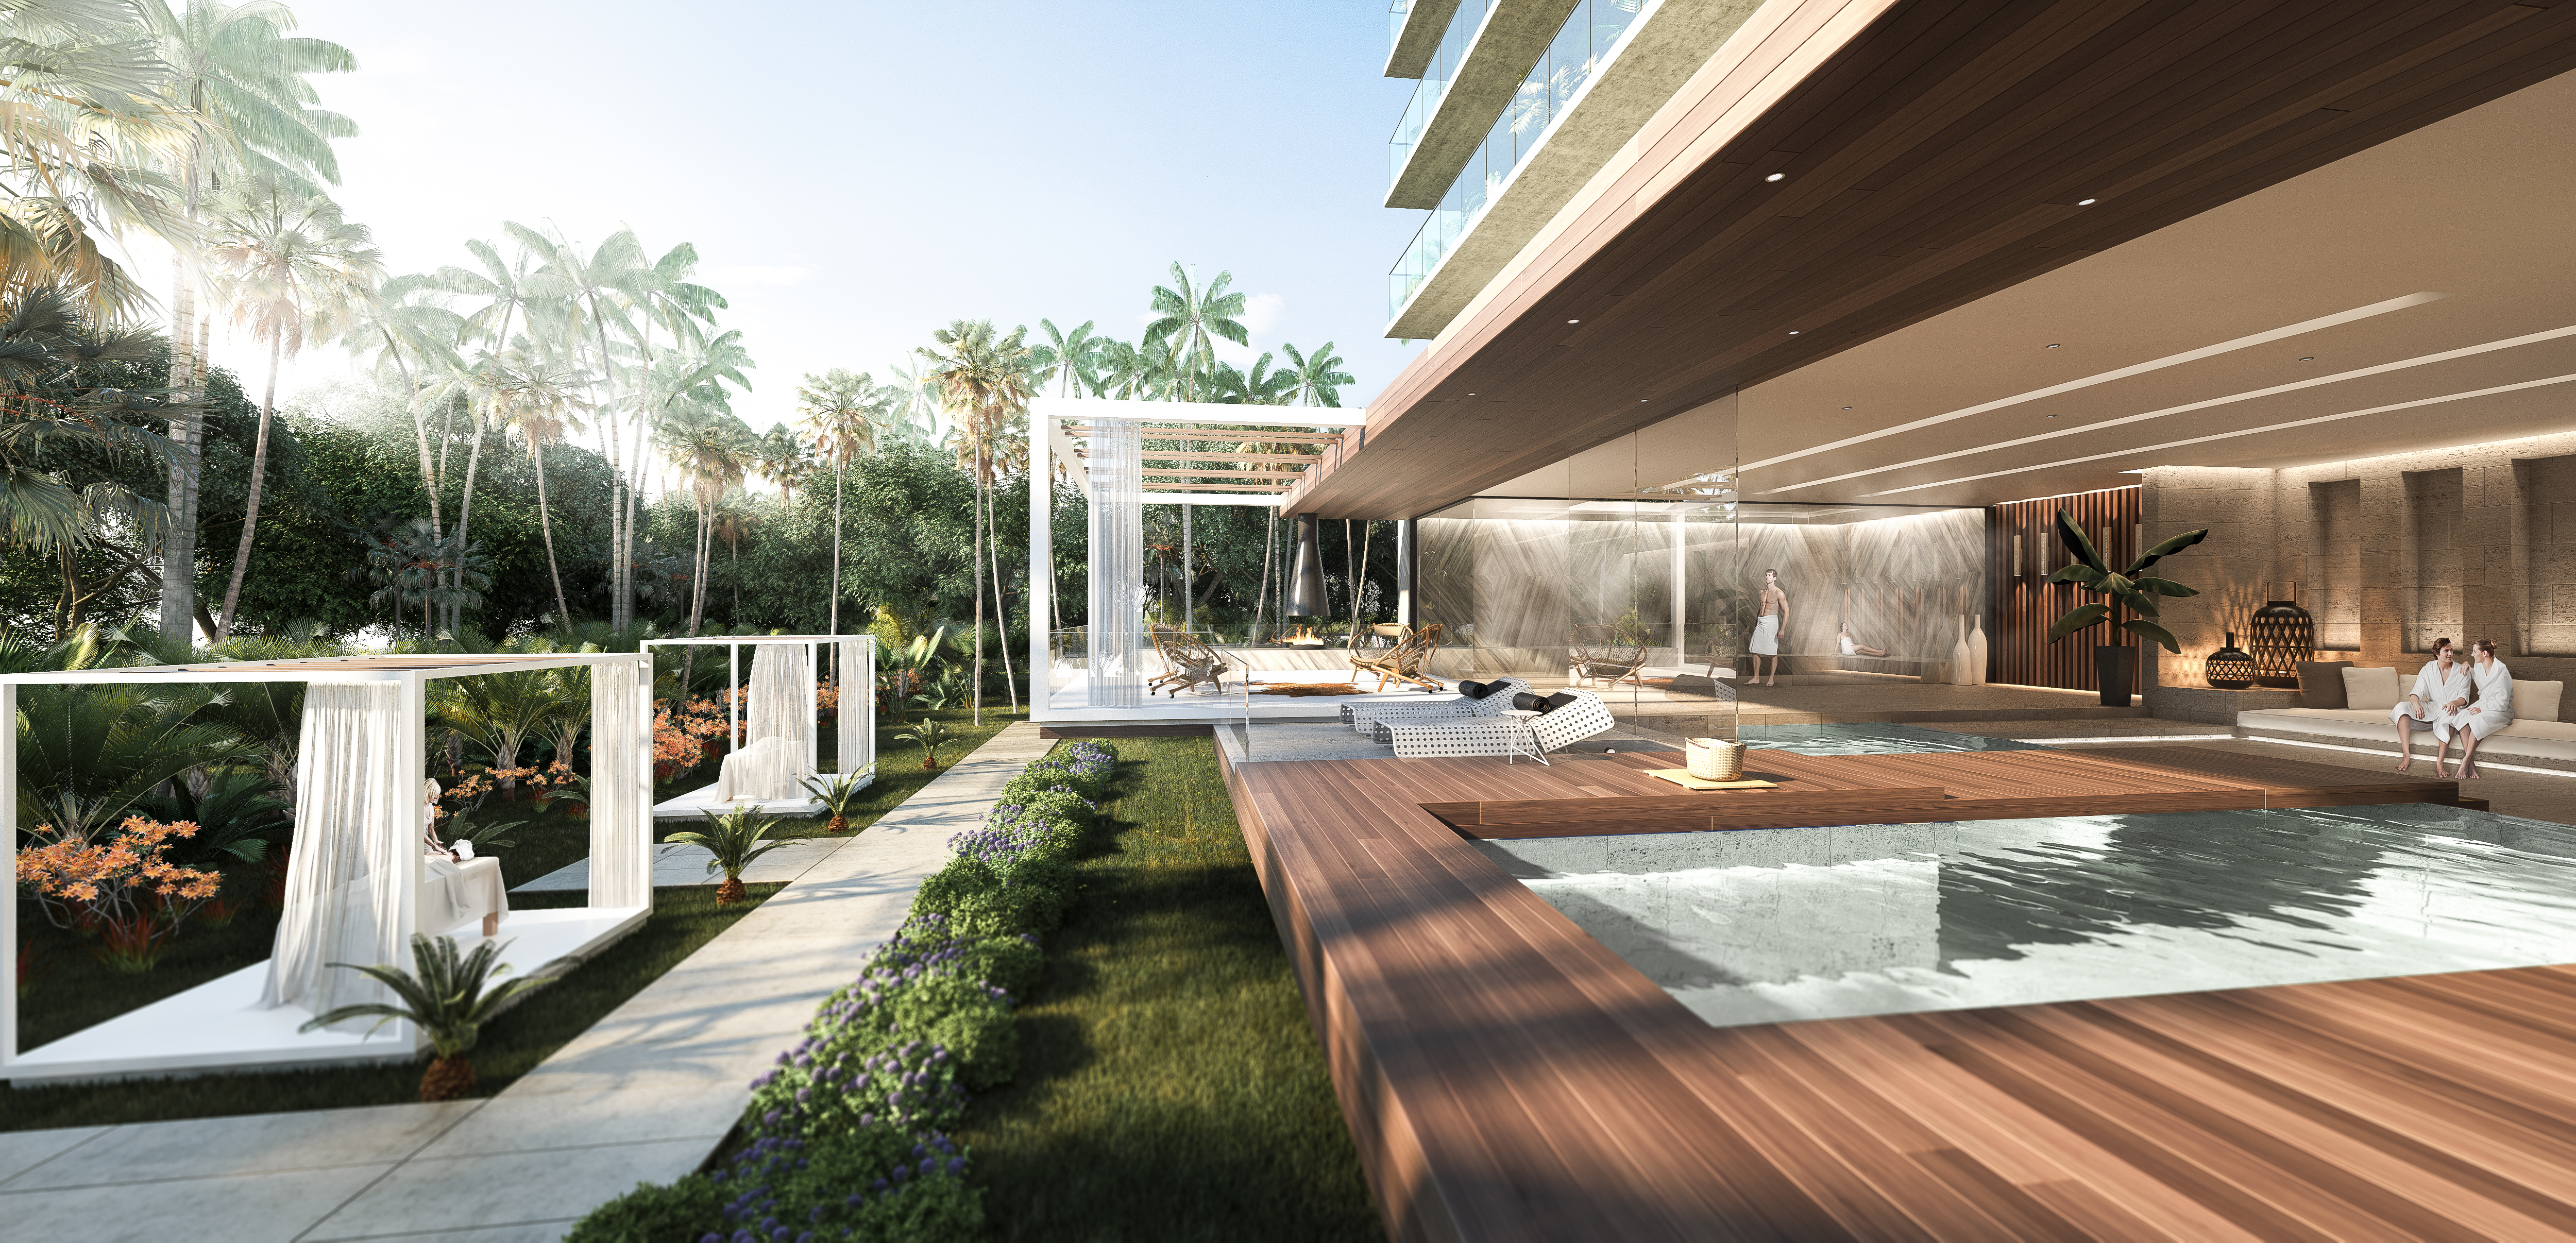 The Harbour Miami Beach - A new Luxury Condo on the water